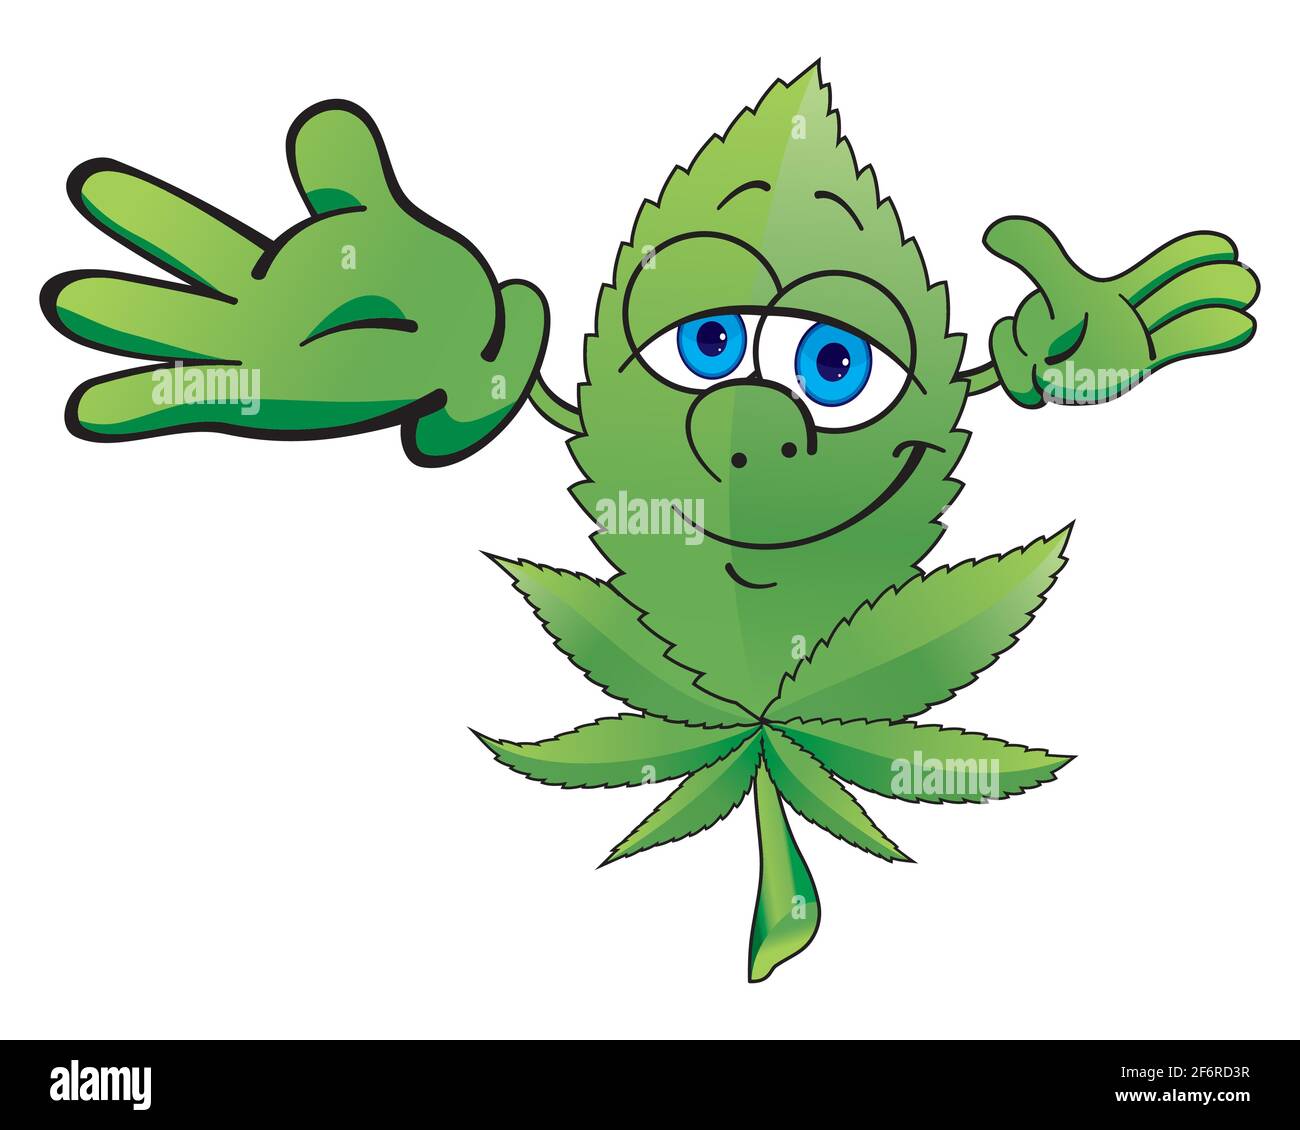 Weed leaf cartoon Cut Out Stock Images & Pictures - Alamy